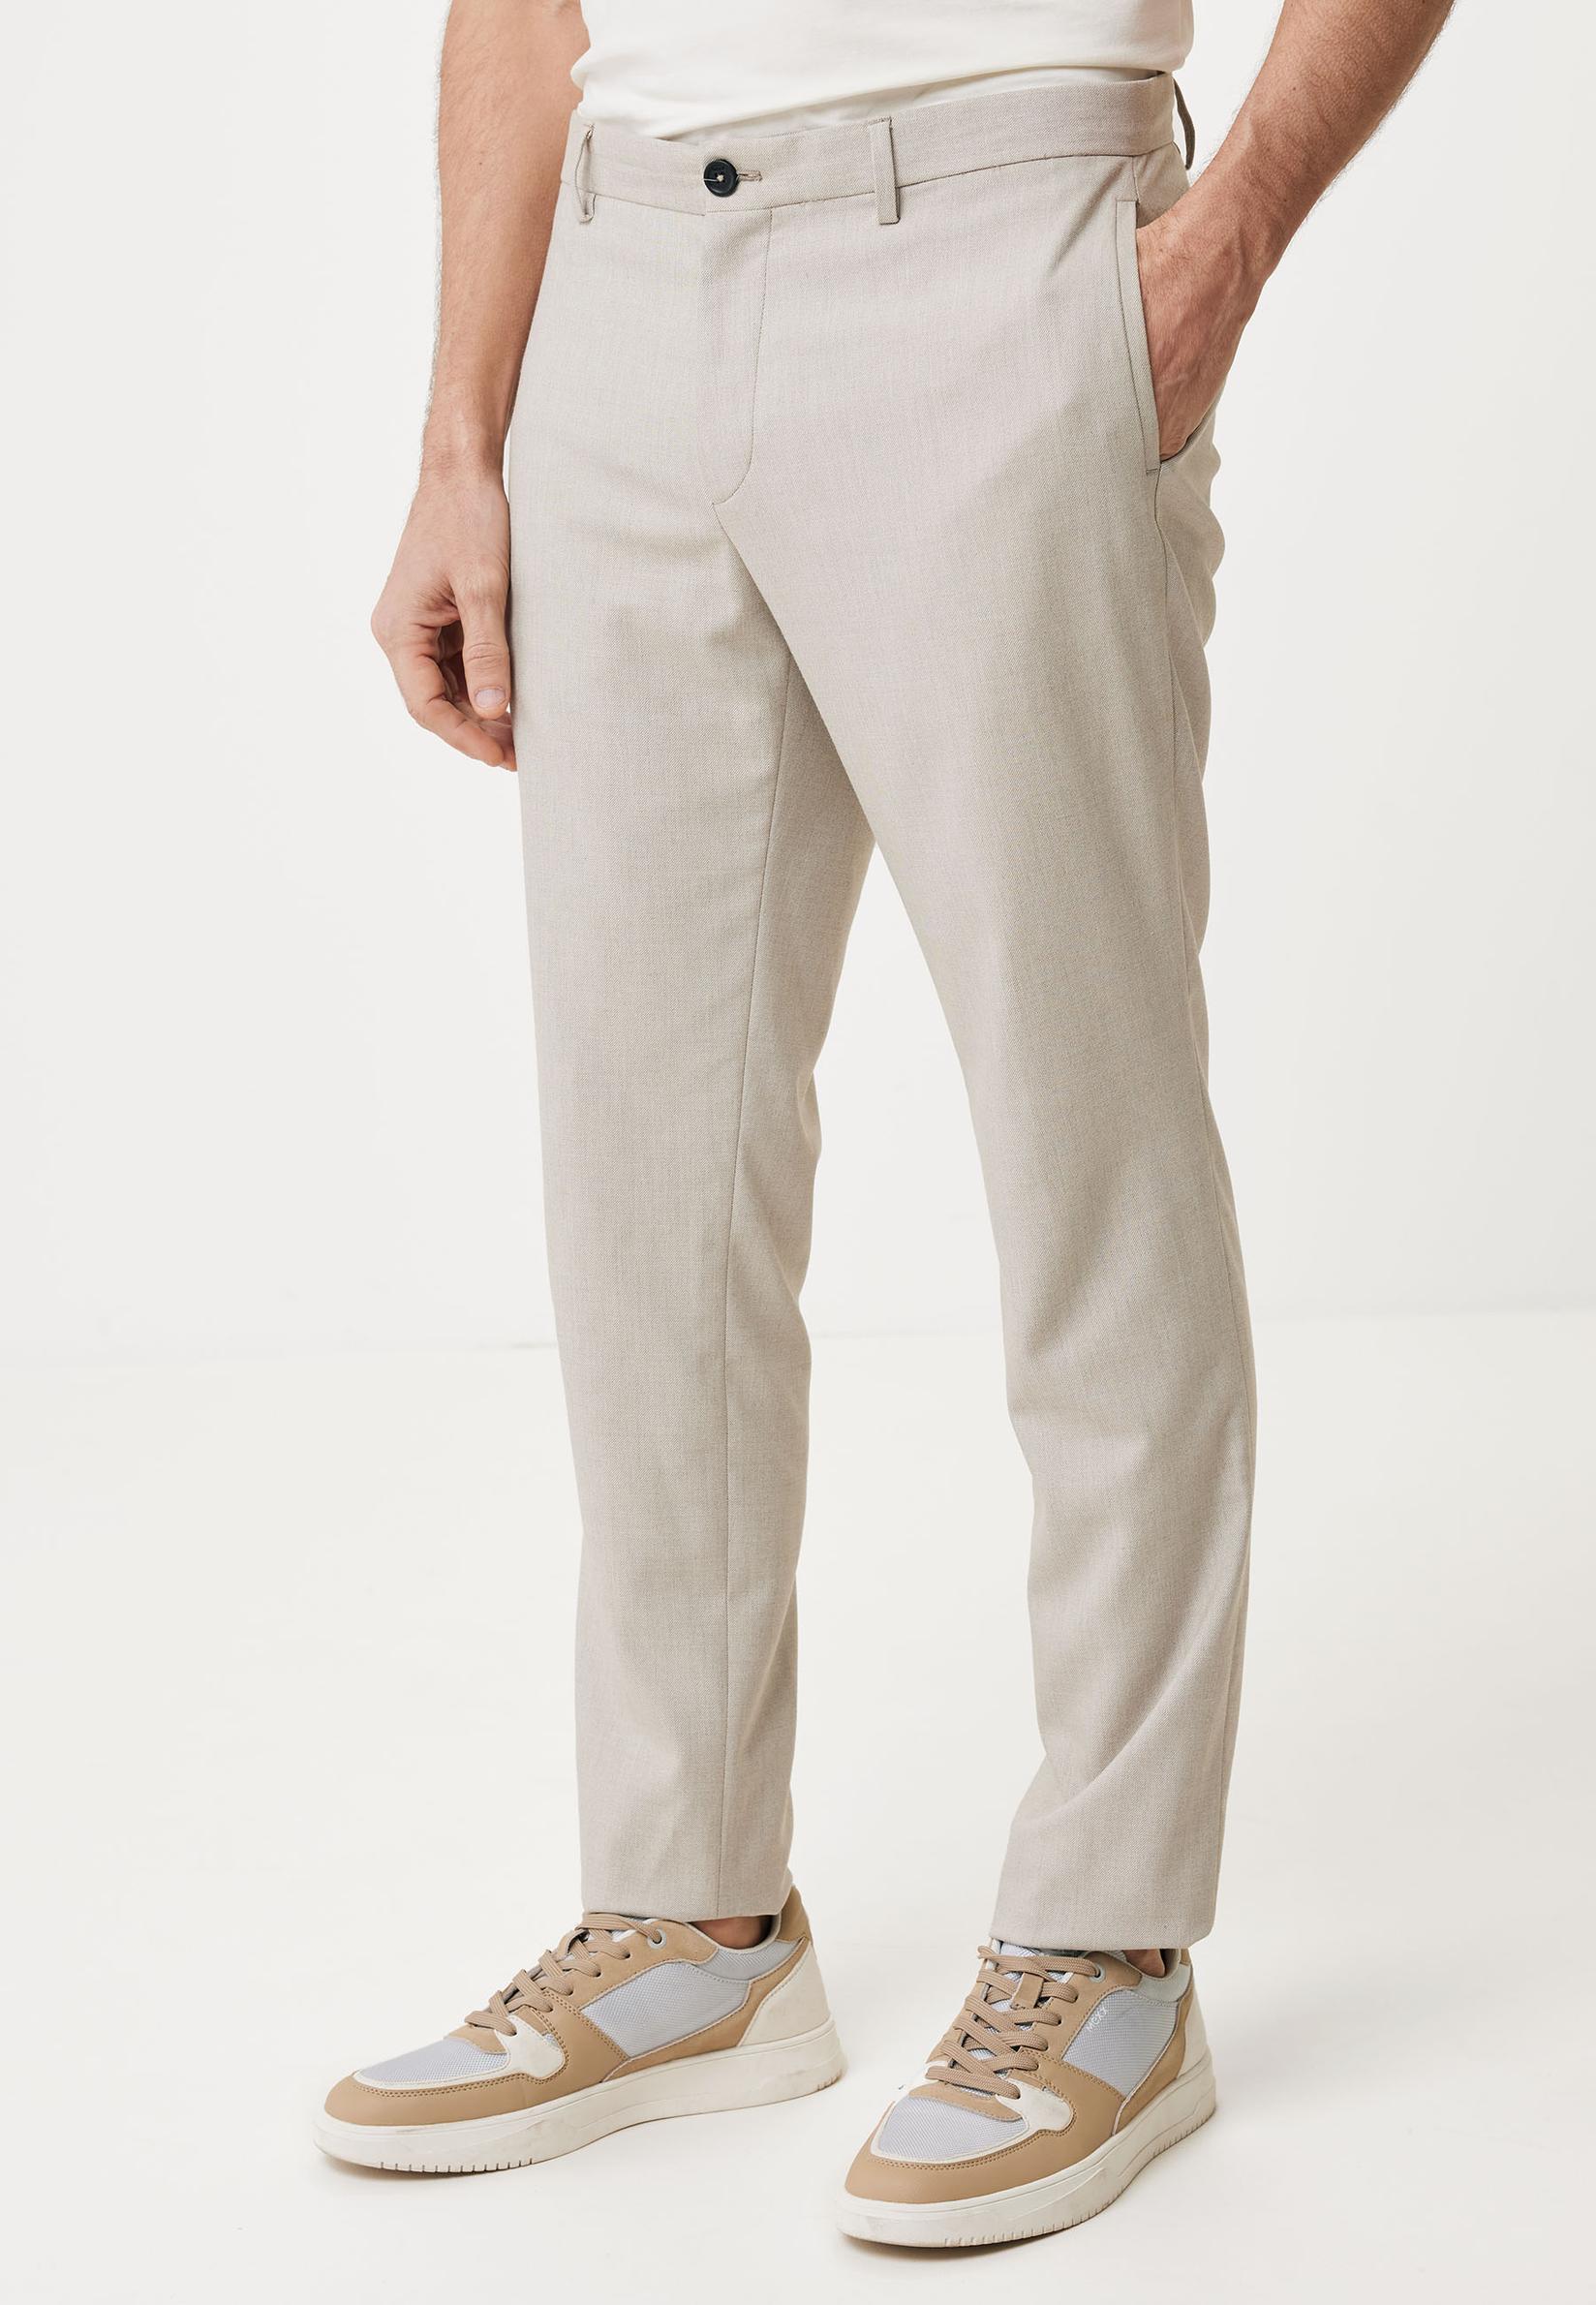 Selected image for MEXX Muške pantalone sive